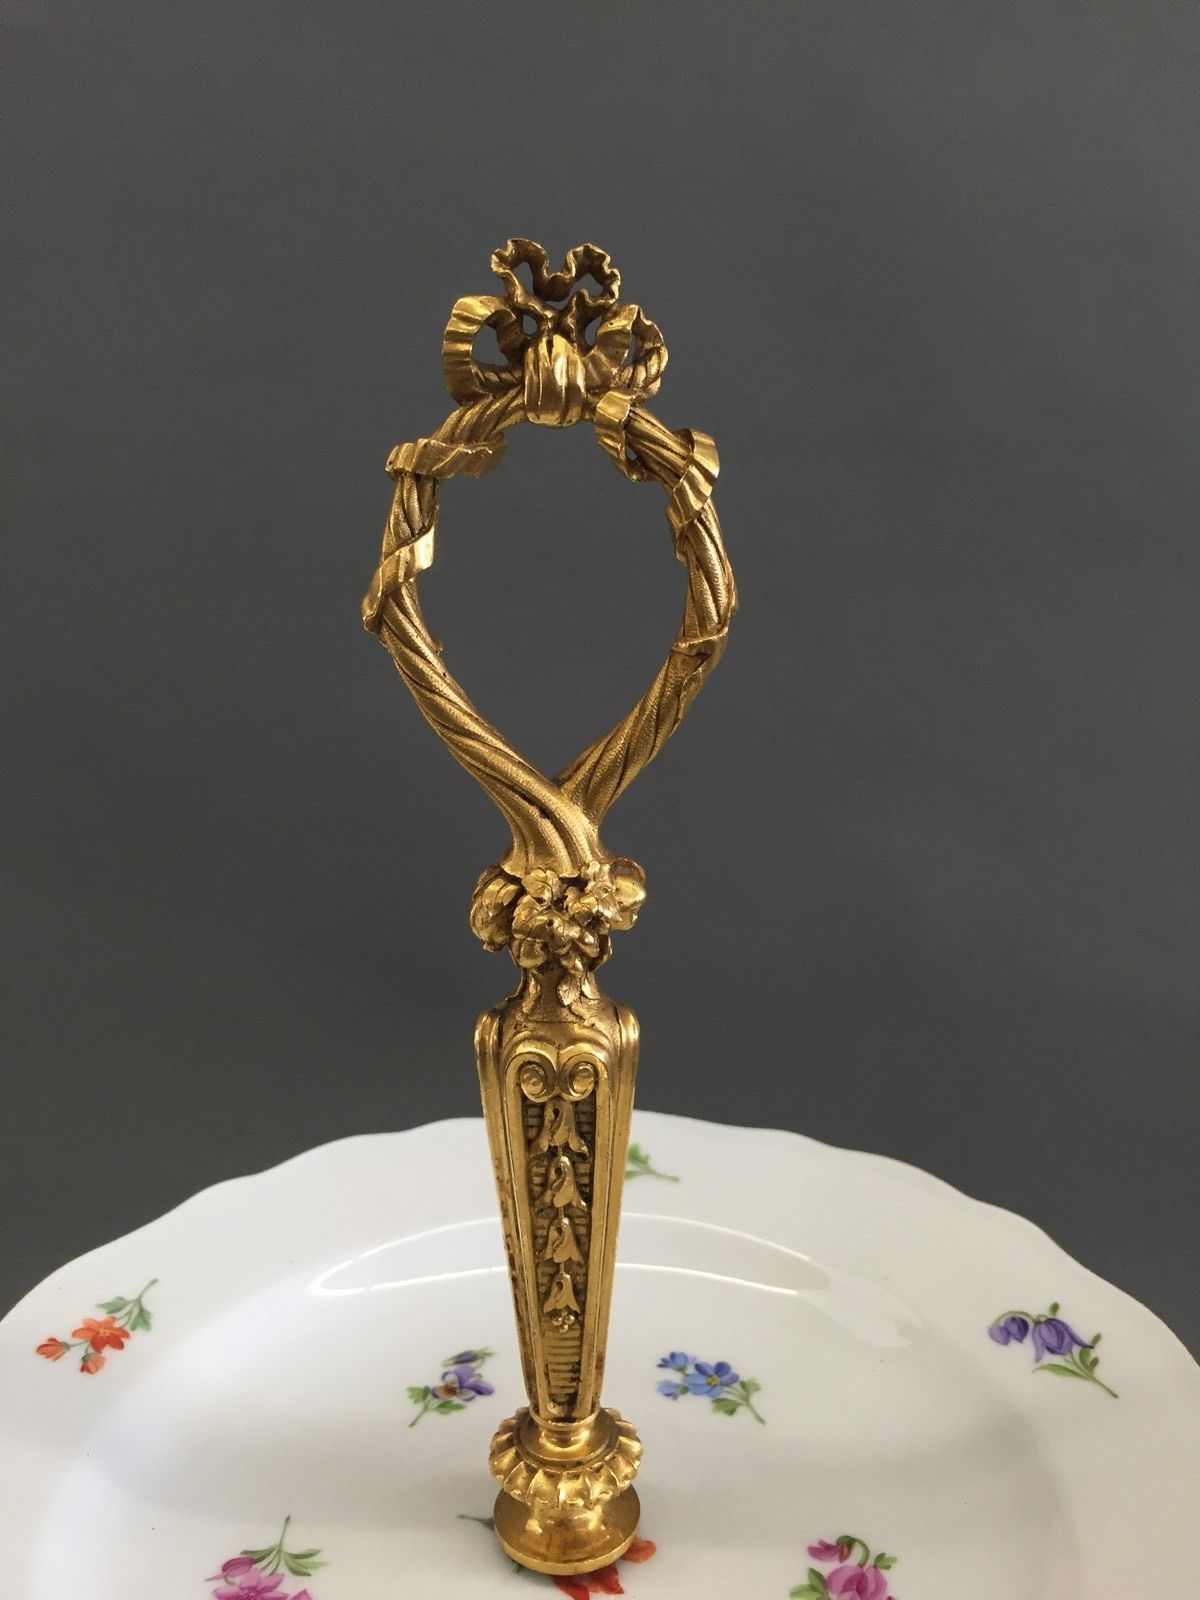 Pair of 19th Century Meissen Porcelain Two-Tier Dessert Dishes with Gilt Bronze In Good Condition For Sale In Los Angeles, CA